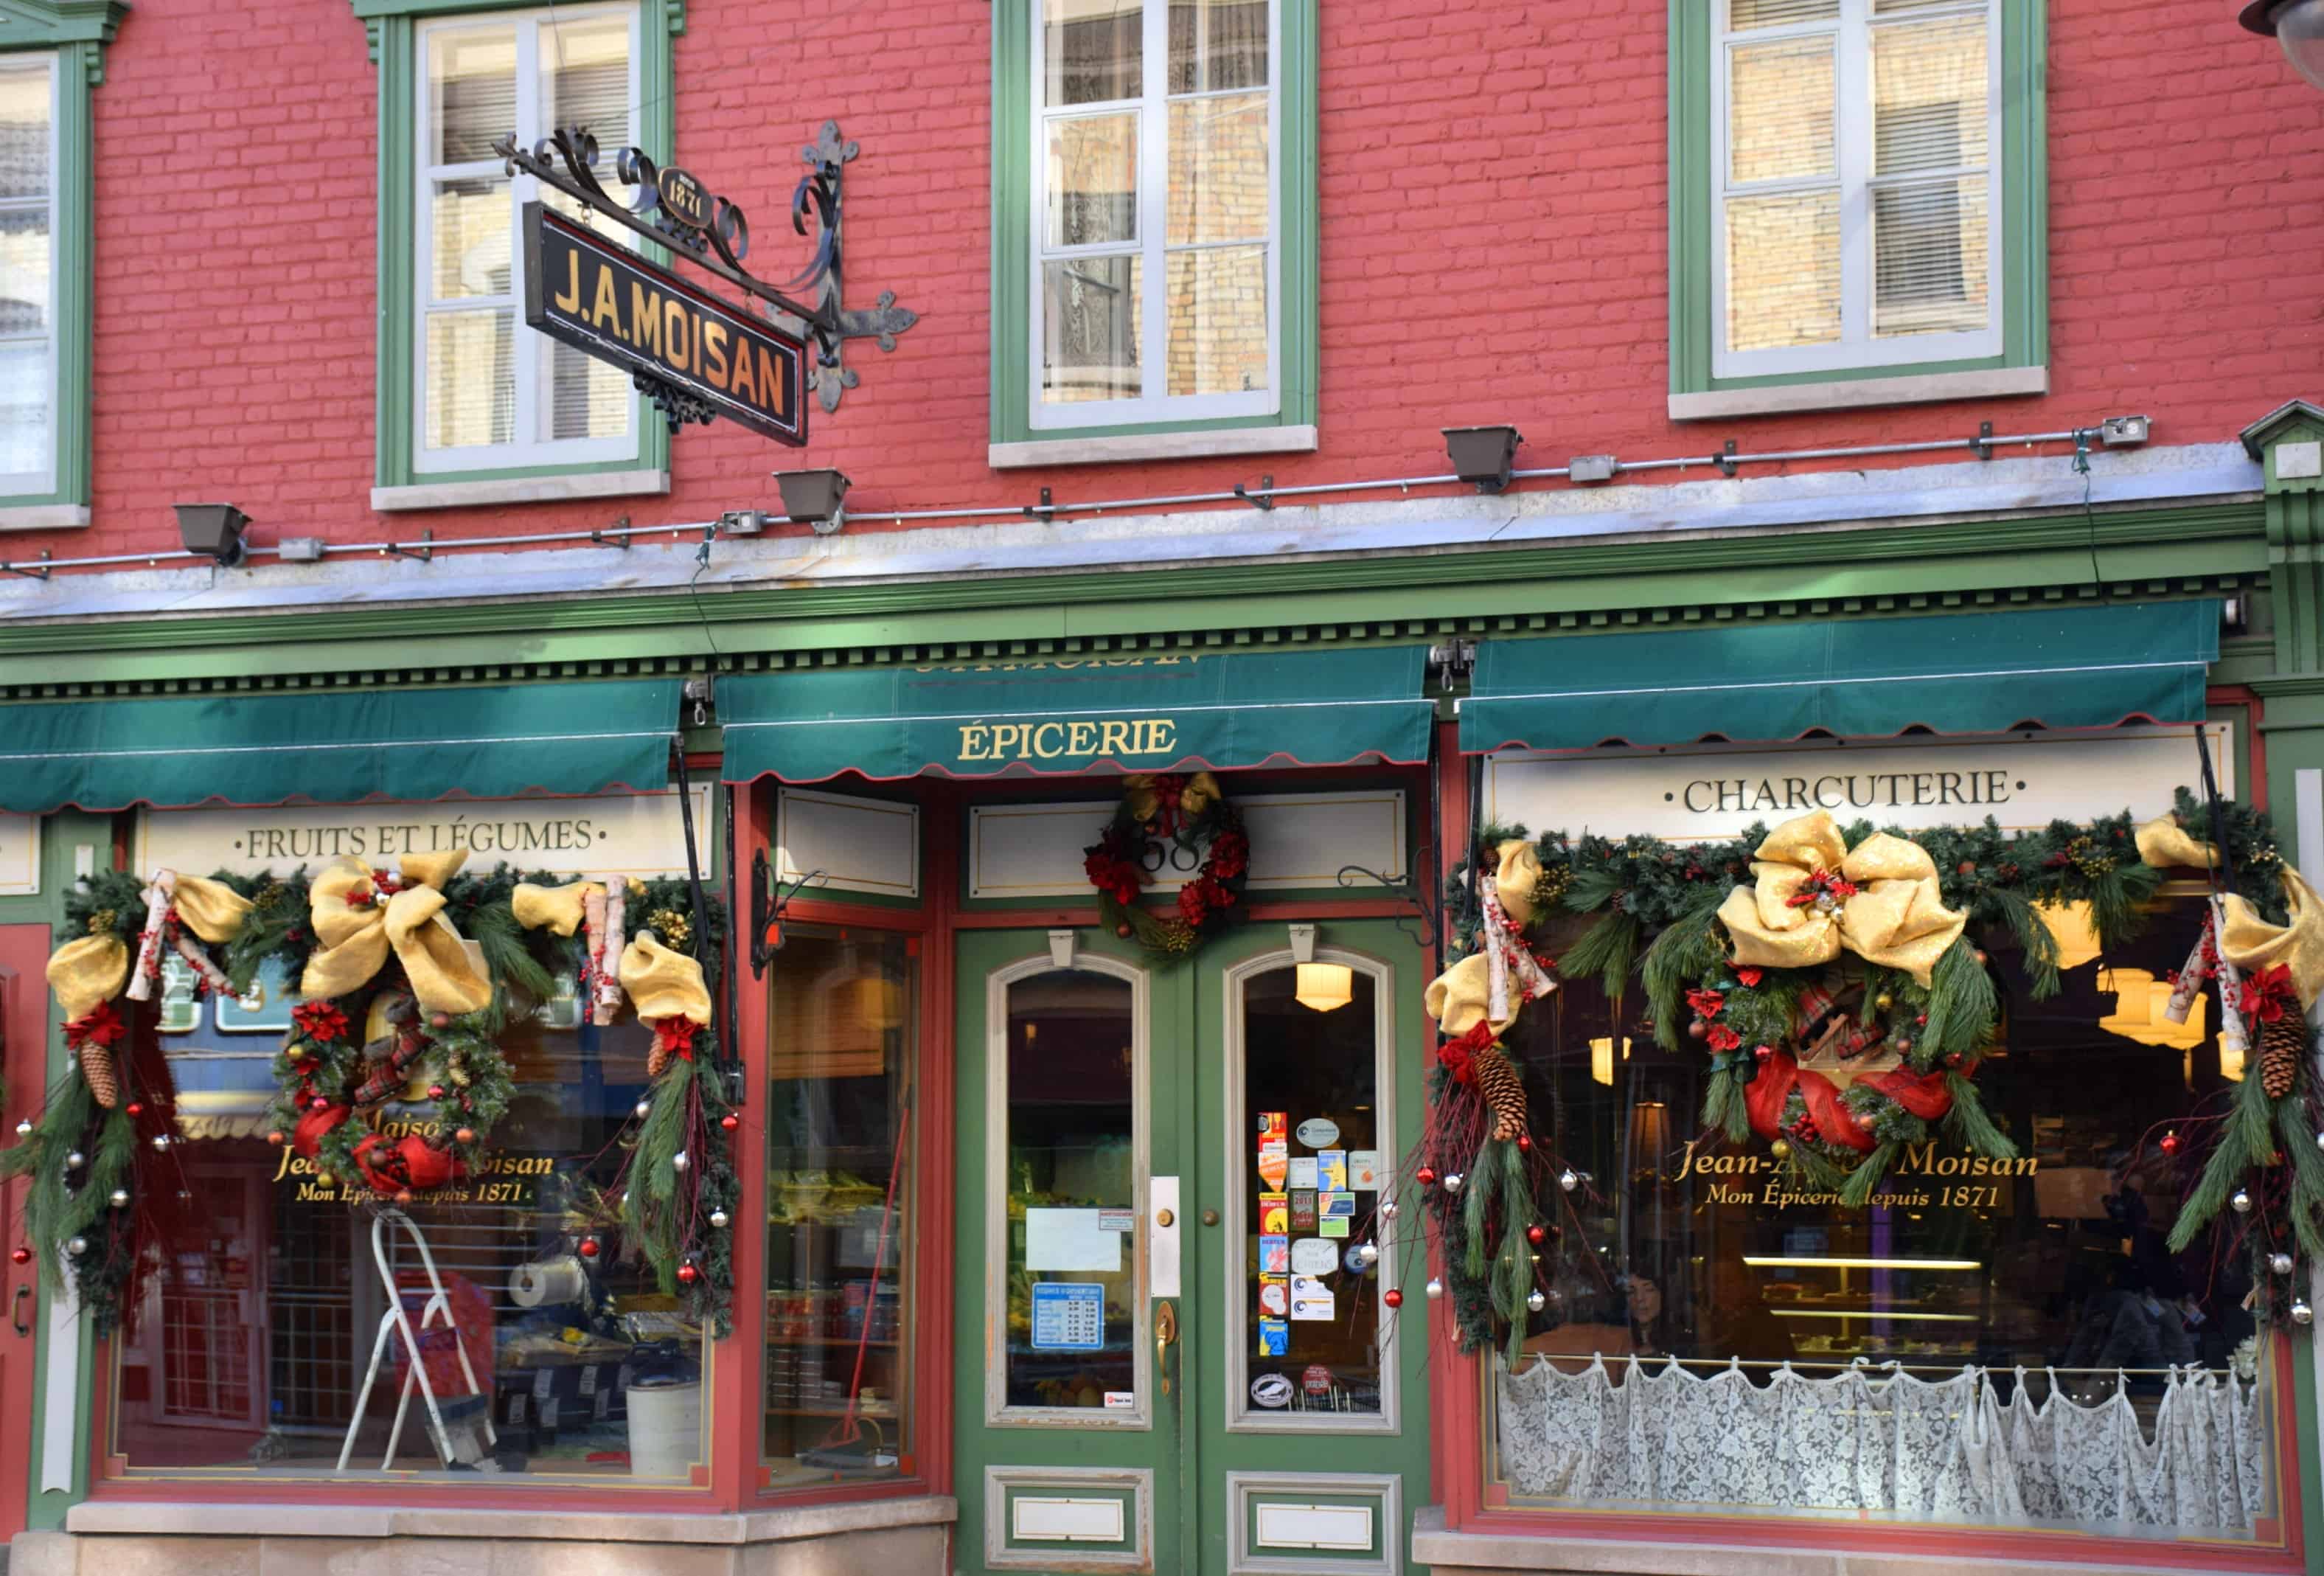 A visit to J.A. Moisin, the oldest grocery store in North America is one of the fun things to do in Quebec City